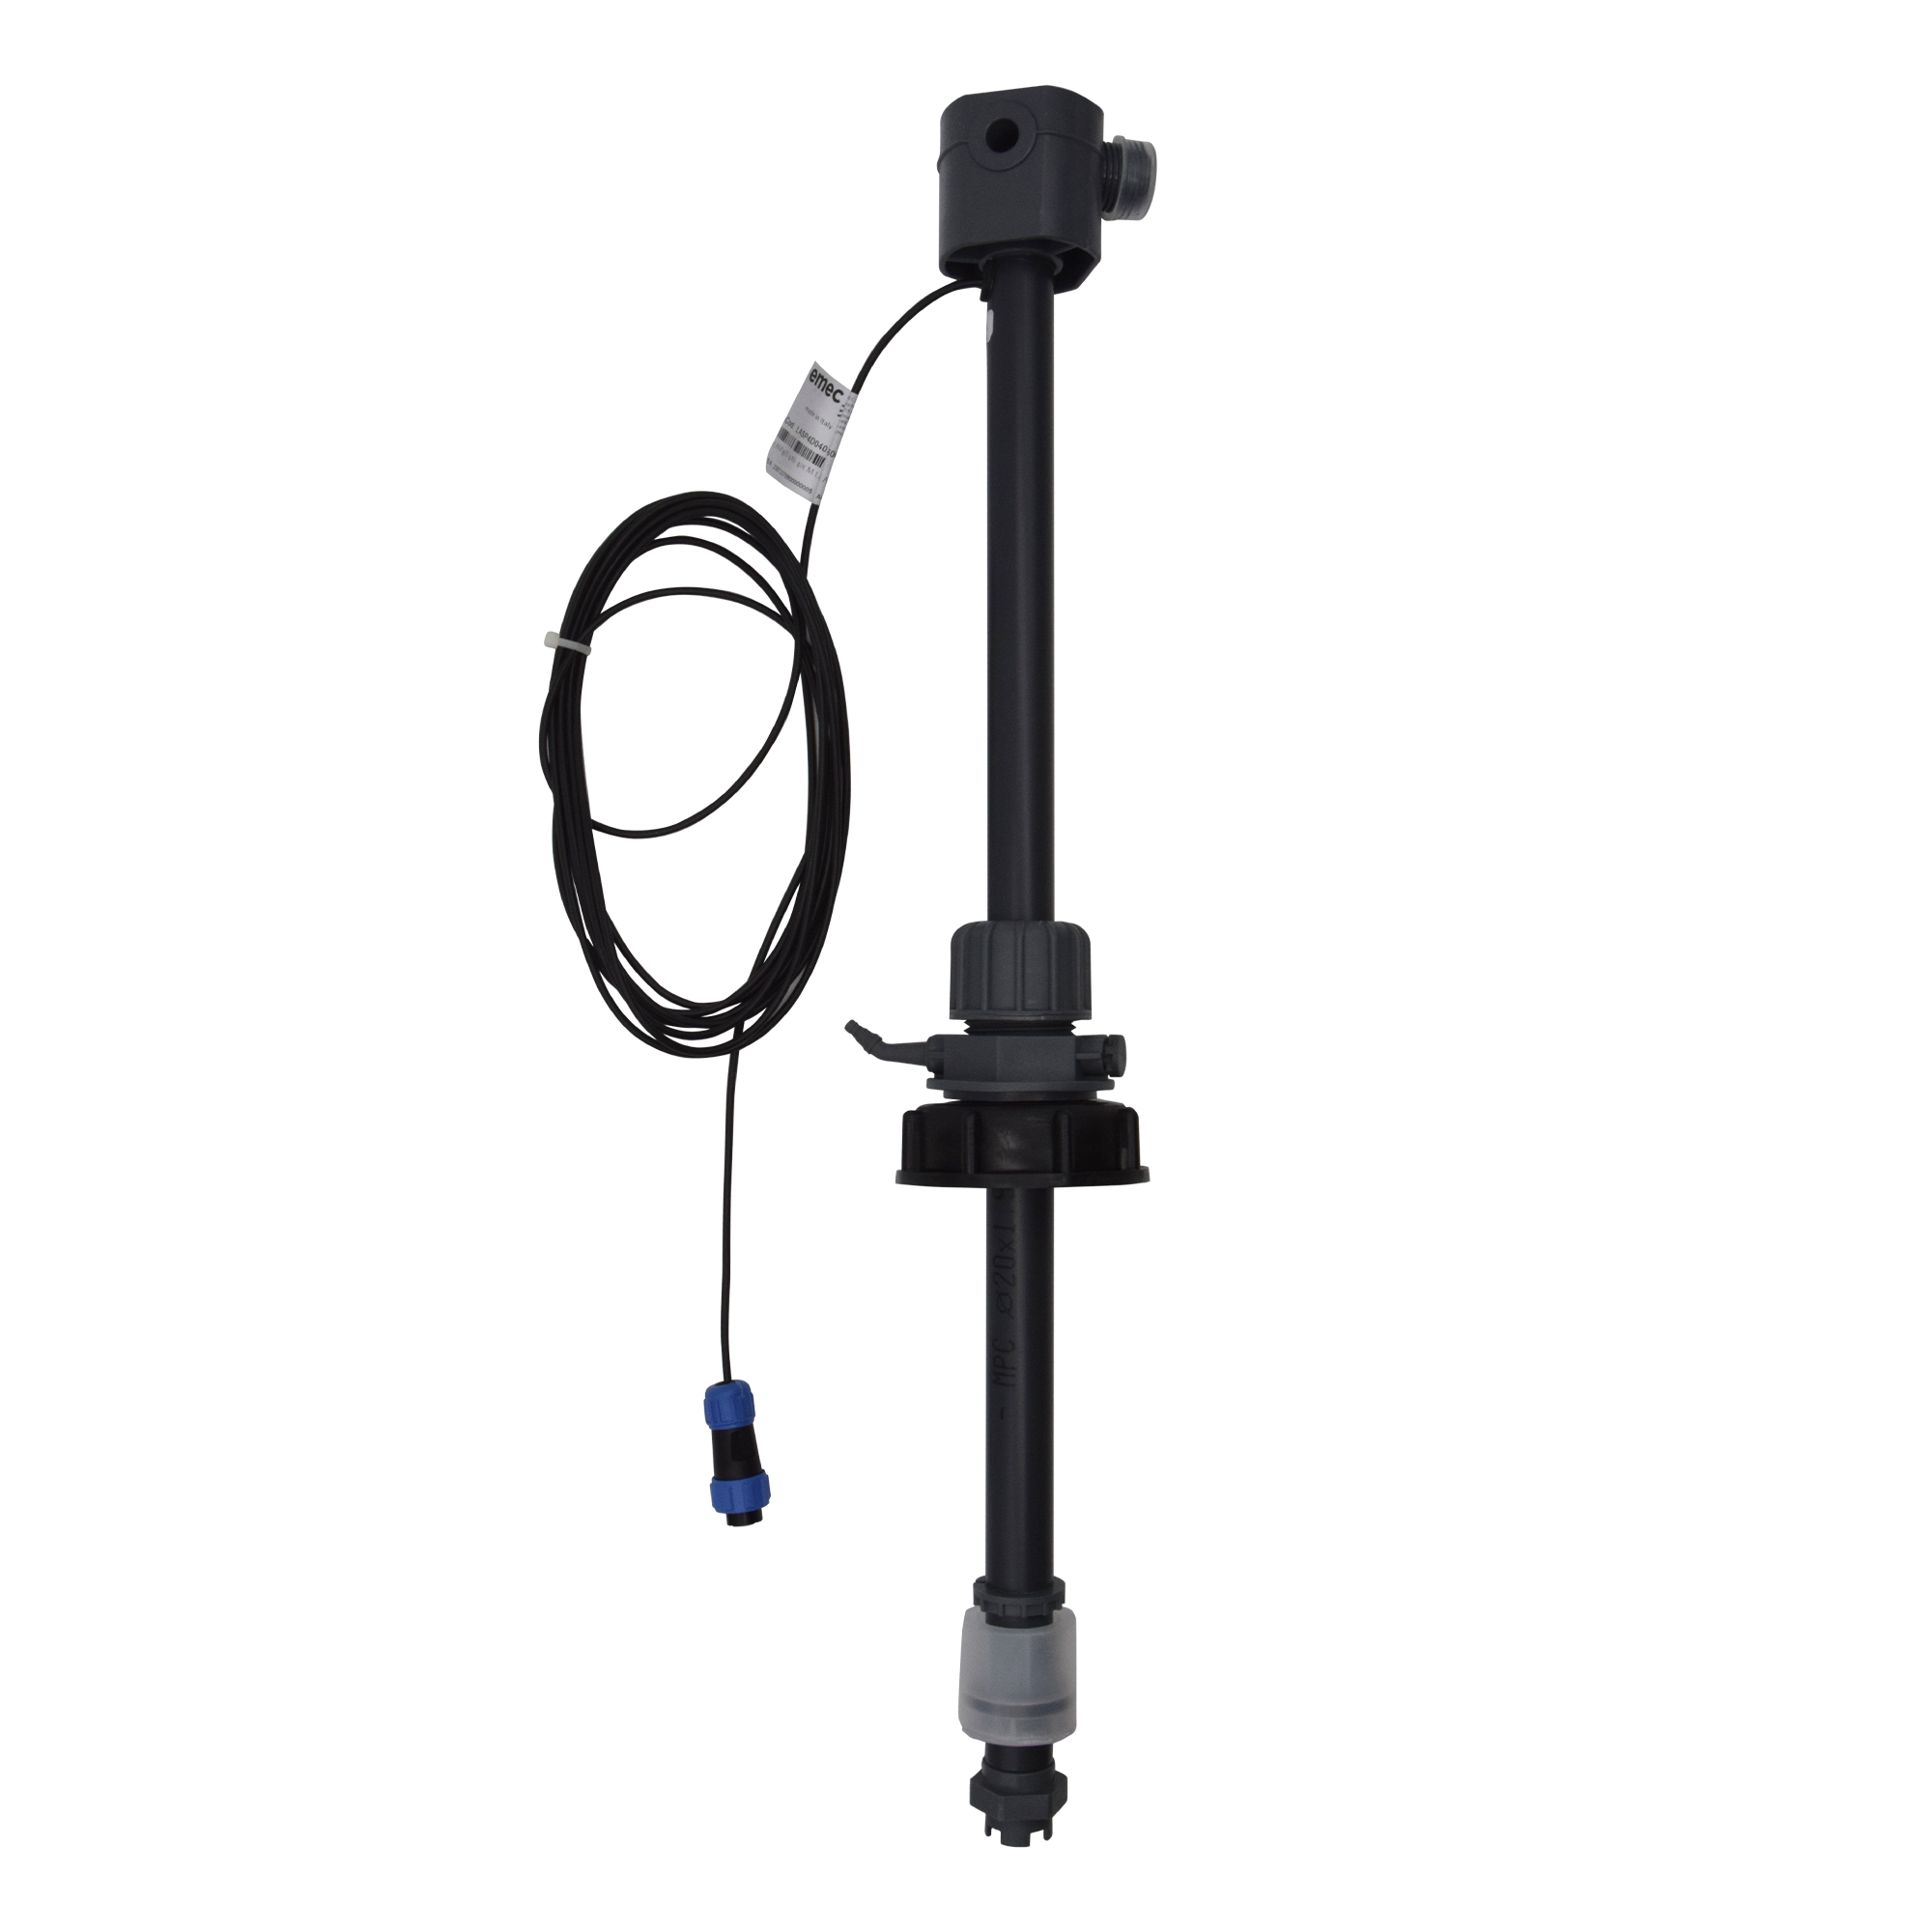 emec Viton suction lance with 40cm immersion length (LASP4) - BNC plug for connection to K- and VMS pumps